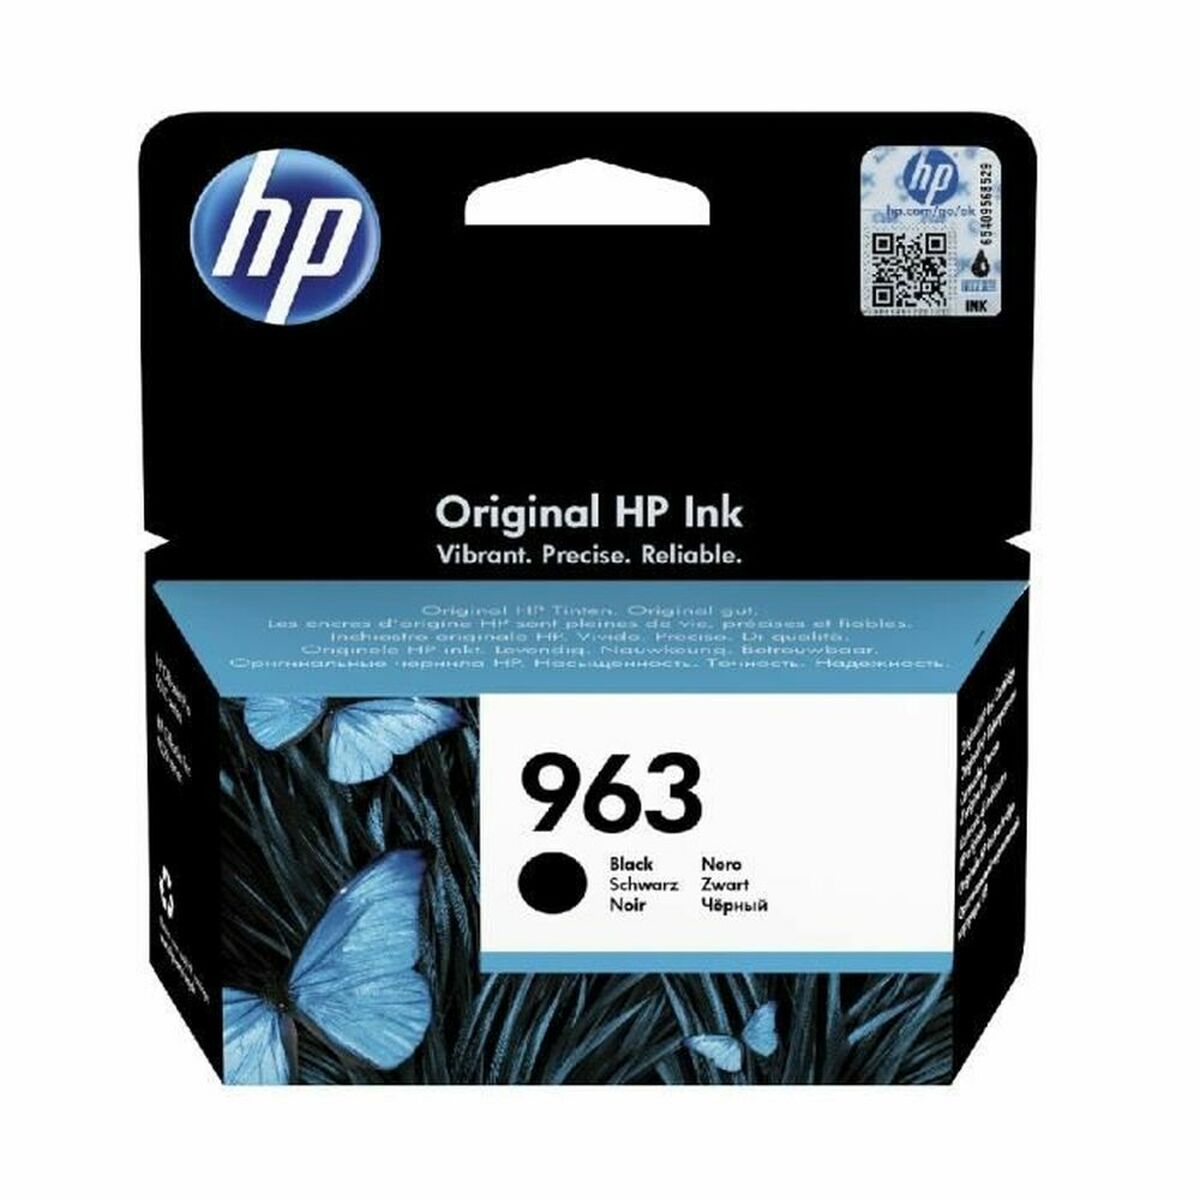 Original Ink Cartridge HP 963 Black, HP, Computing, Printers and accessories, original-ink-cartridge-hp-963-black, Brand_HP, category-reference-2609, category-reference-2642, category-reference-2874, category-reference-t-19685, category-reference-t-19911, category-reference-t-21377, category-reference-t-25688, Condition_NEW, office, Price_50 - 100, Teleworking, RiotNook